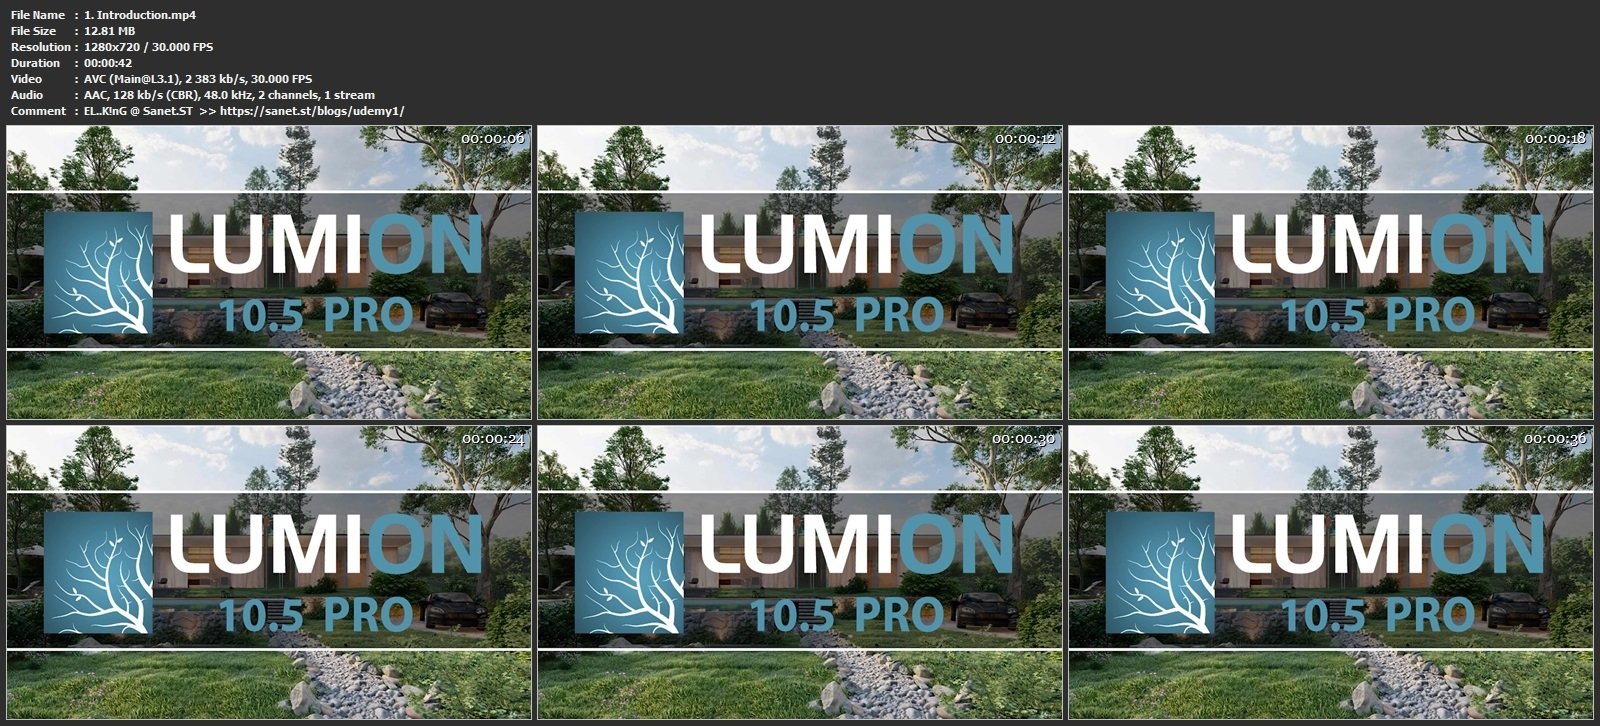 the difference between lumion and lumion pro